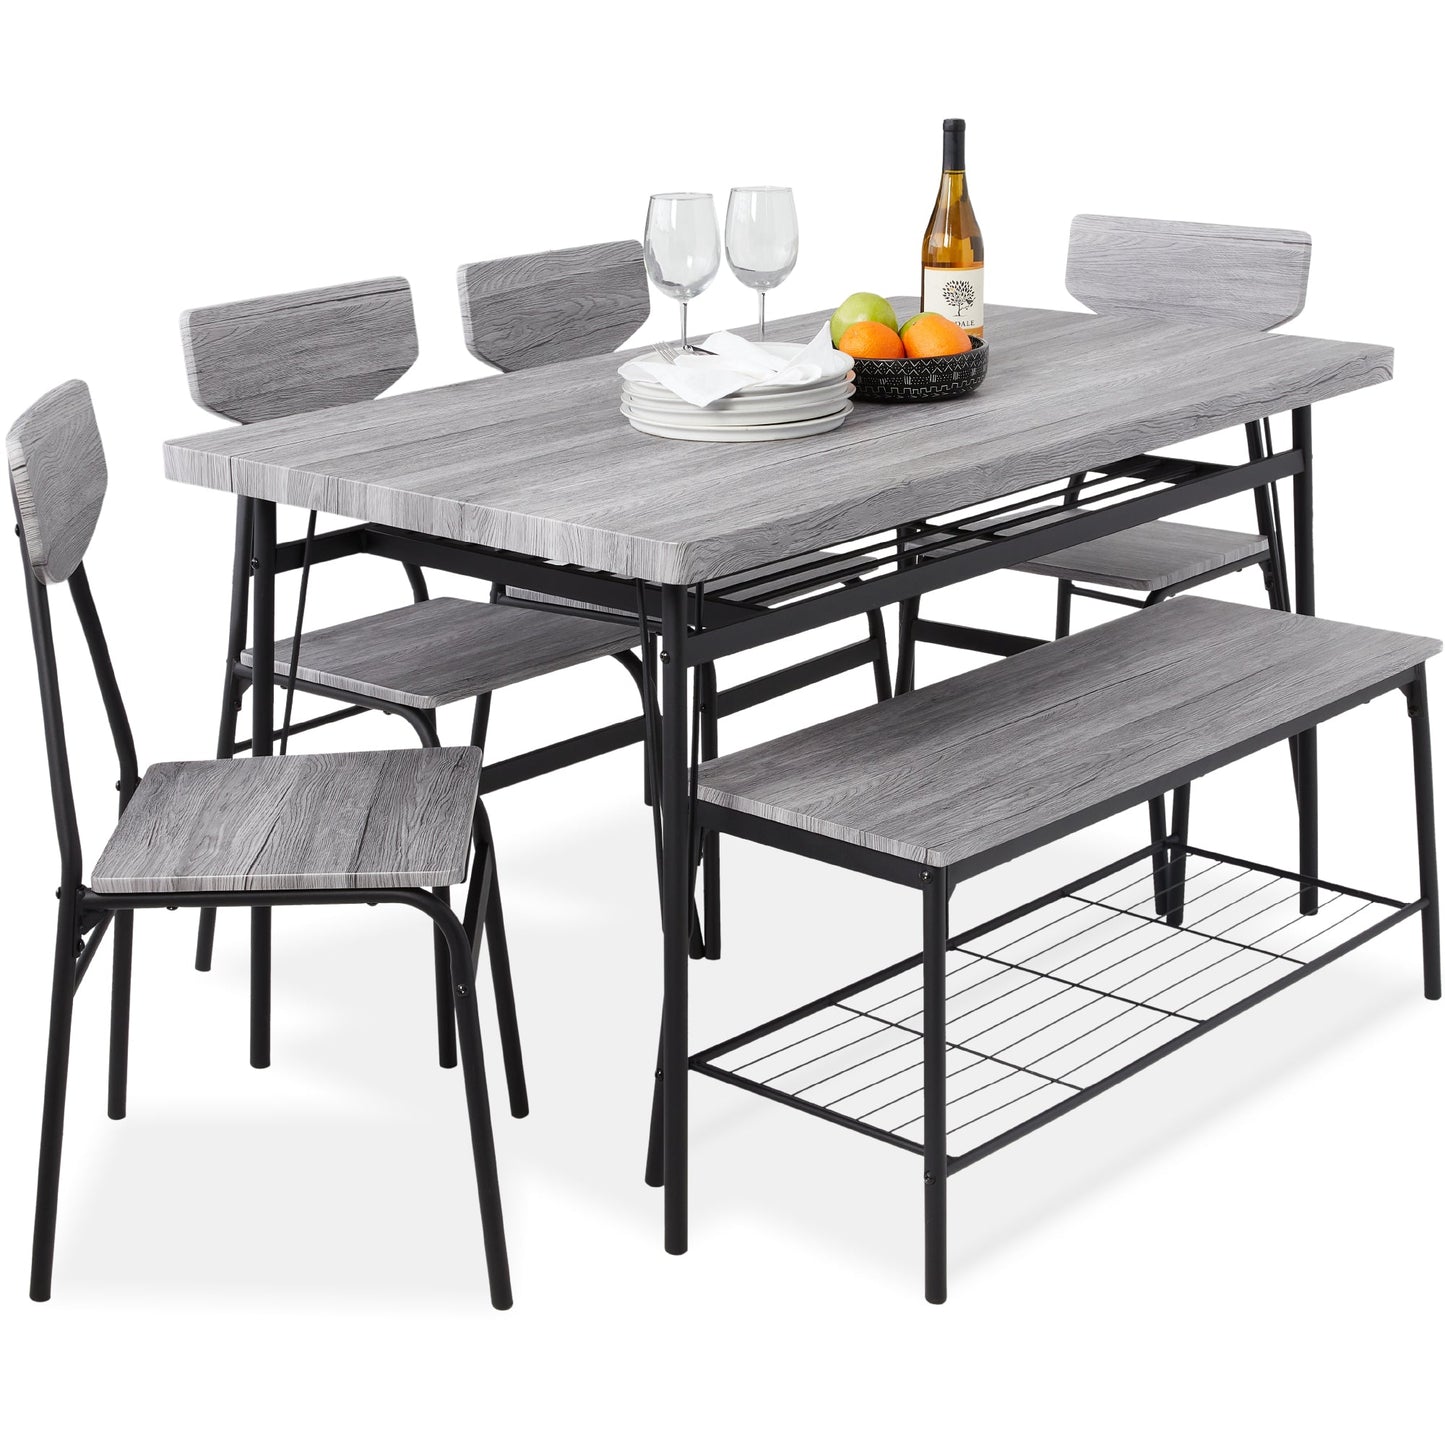 6-Piece Modern Dining Set w/ Storage Racks, Table, Bench, 4 Chairs - 55in